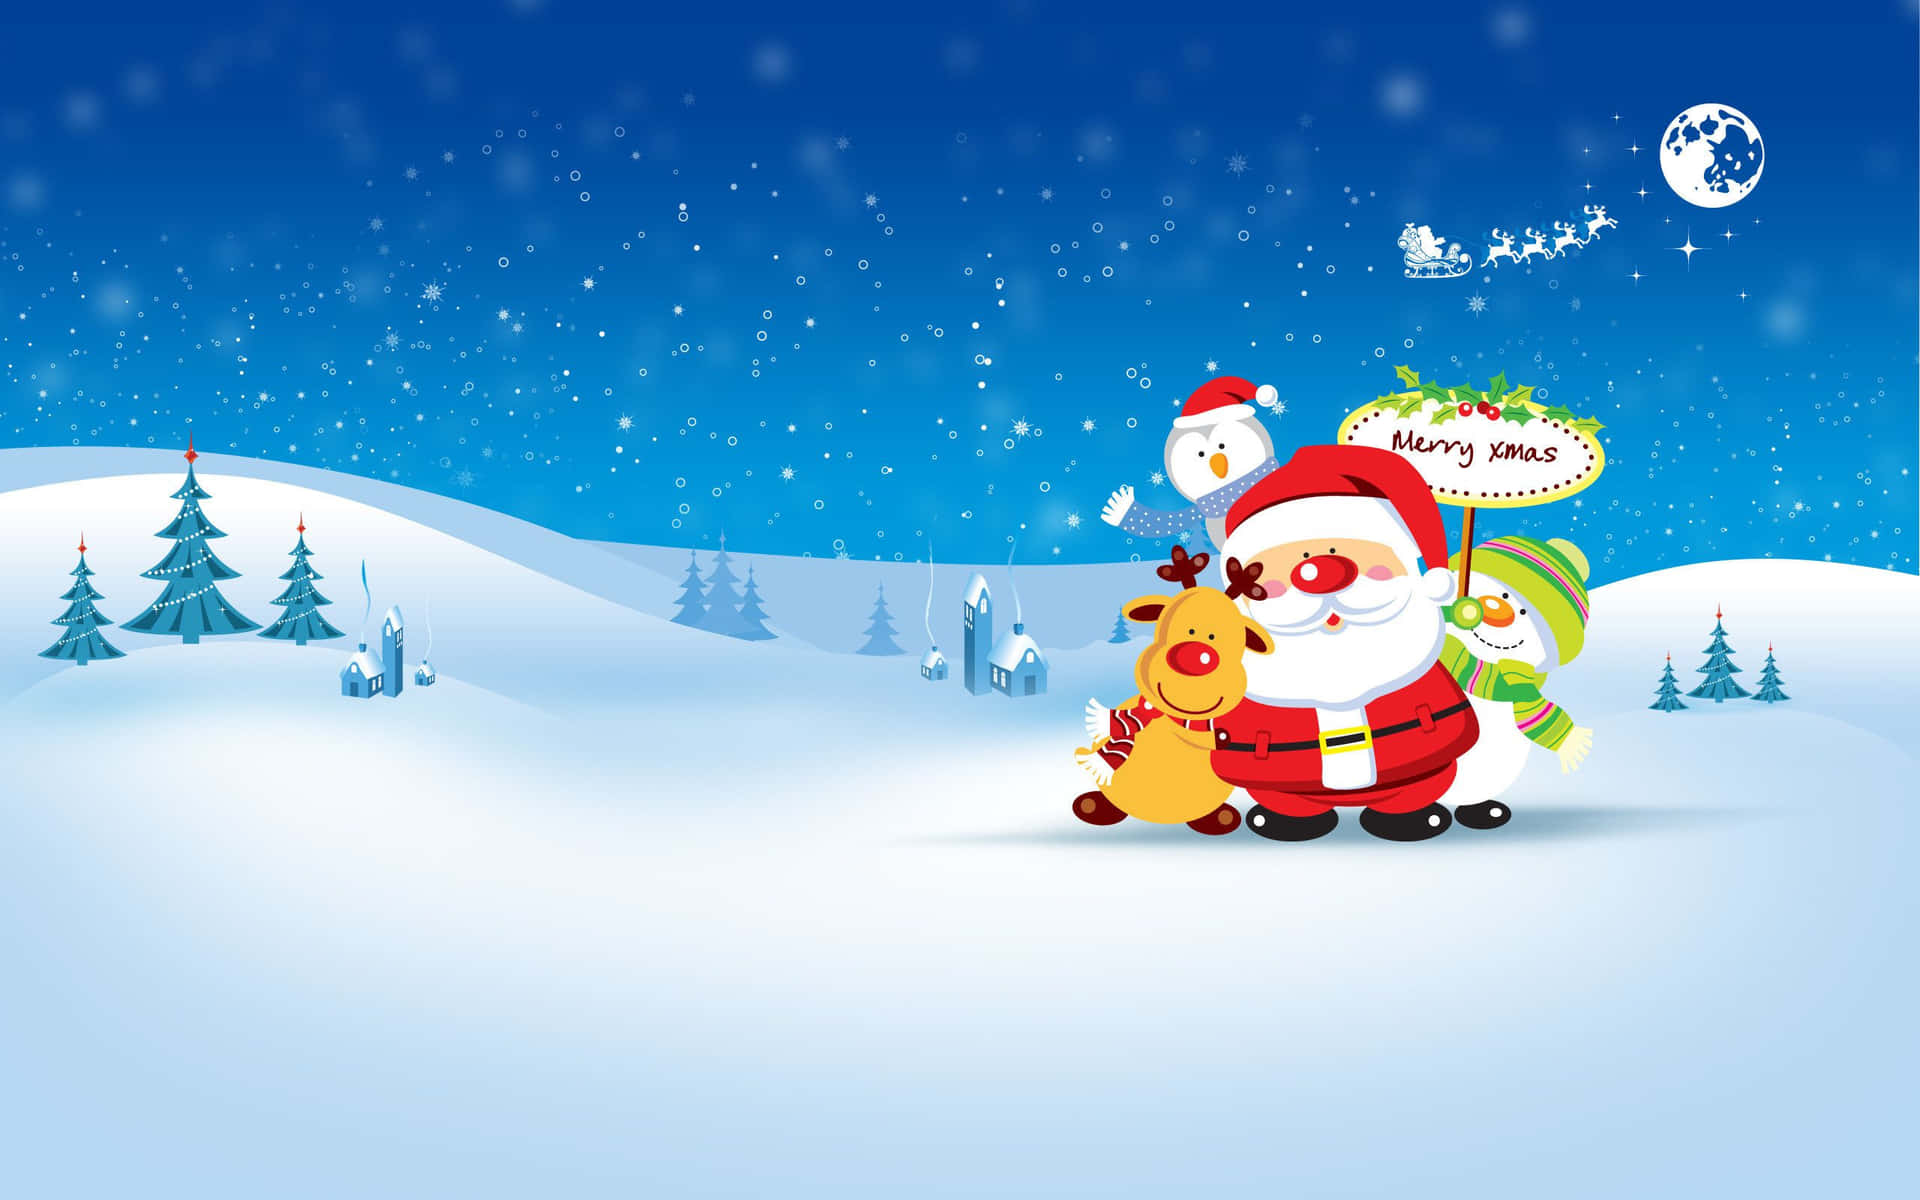 Have a jolly good Christmas with Santa Claus Wallpaper